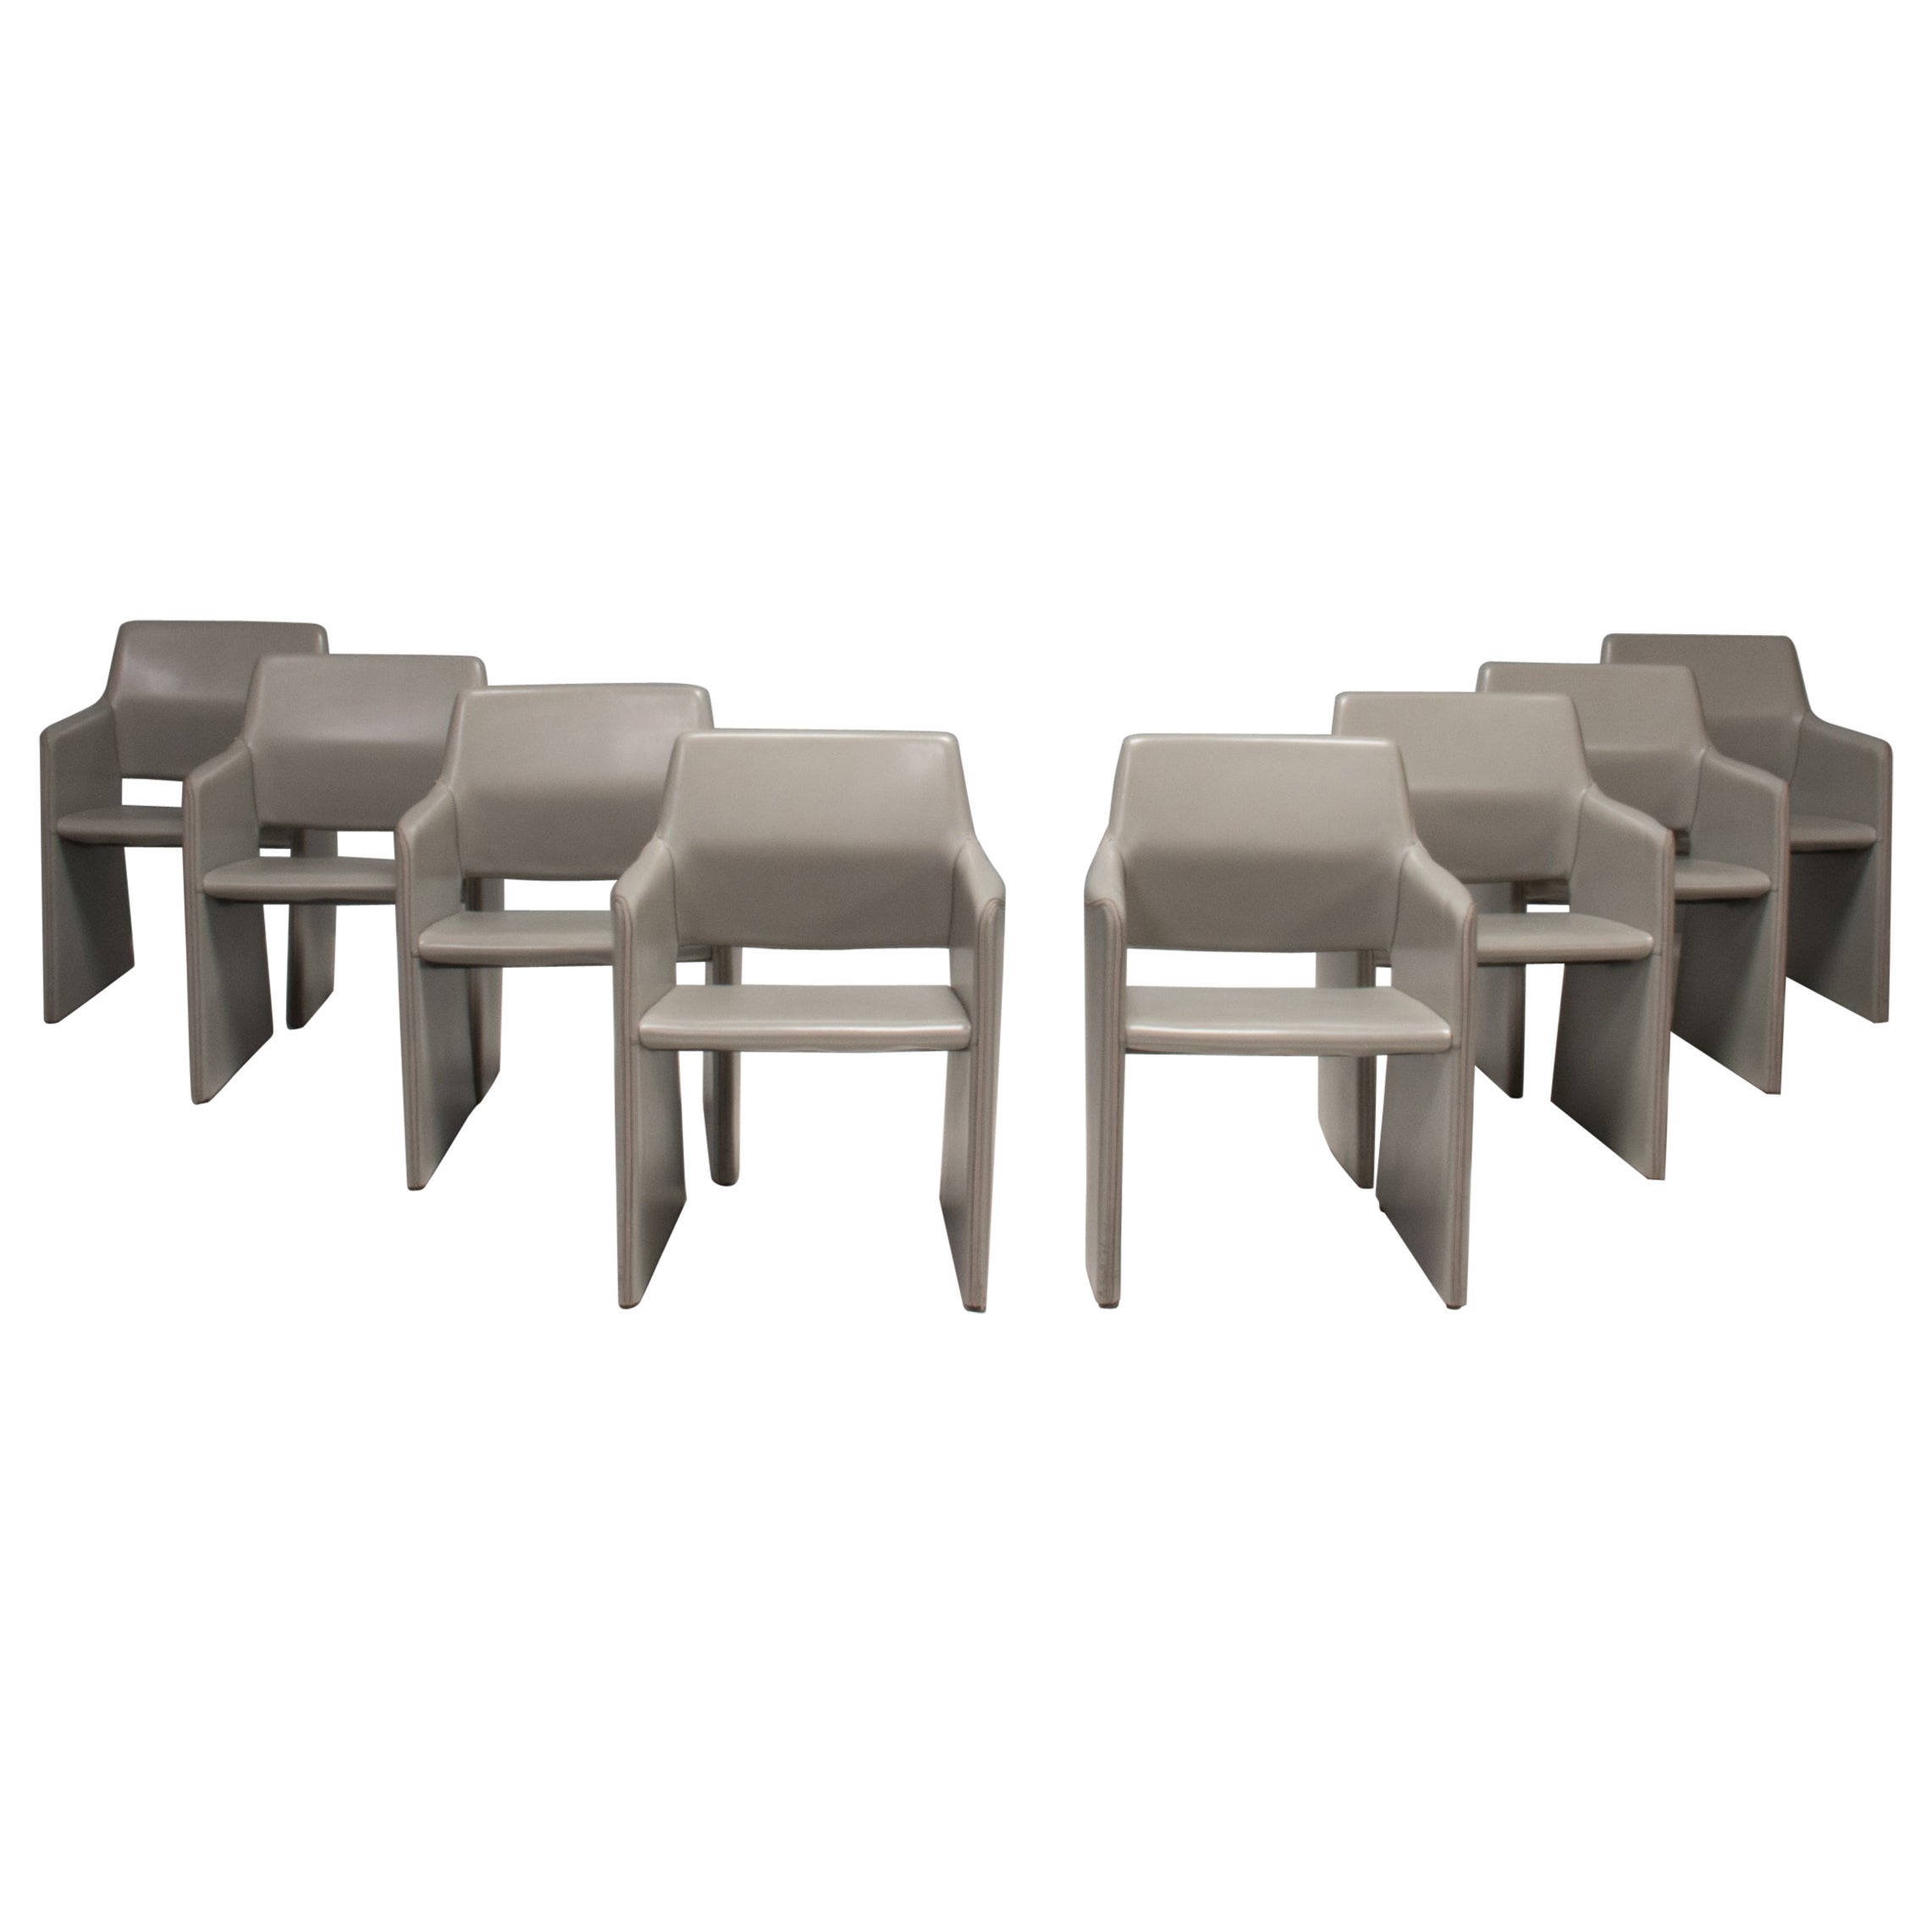 Rodolfo Dordoni for Arper Corte Grey Leather Dining Chairs, Set of 8 For Sale